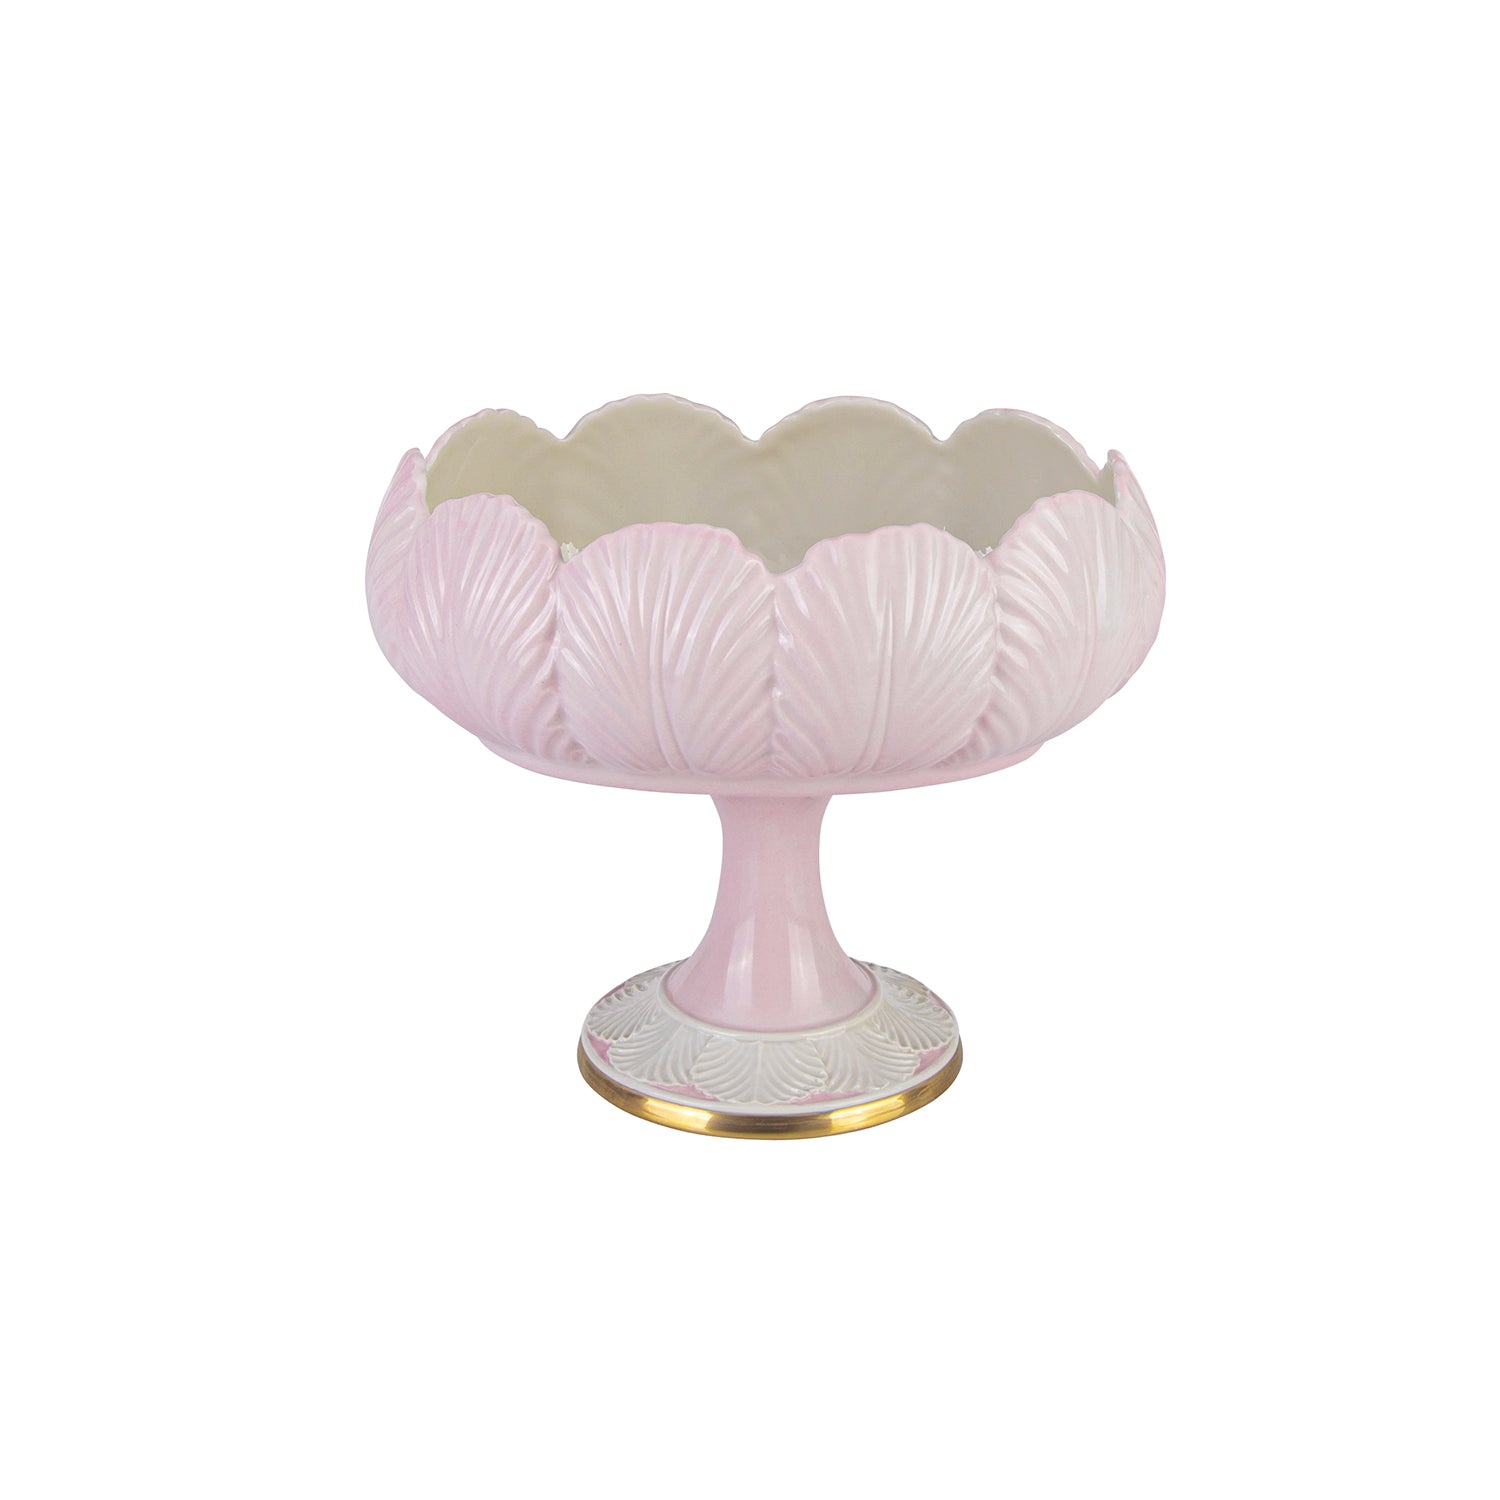 Tulip Small Serving Bowl Stand - Pink & White